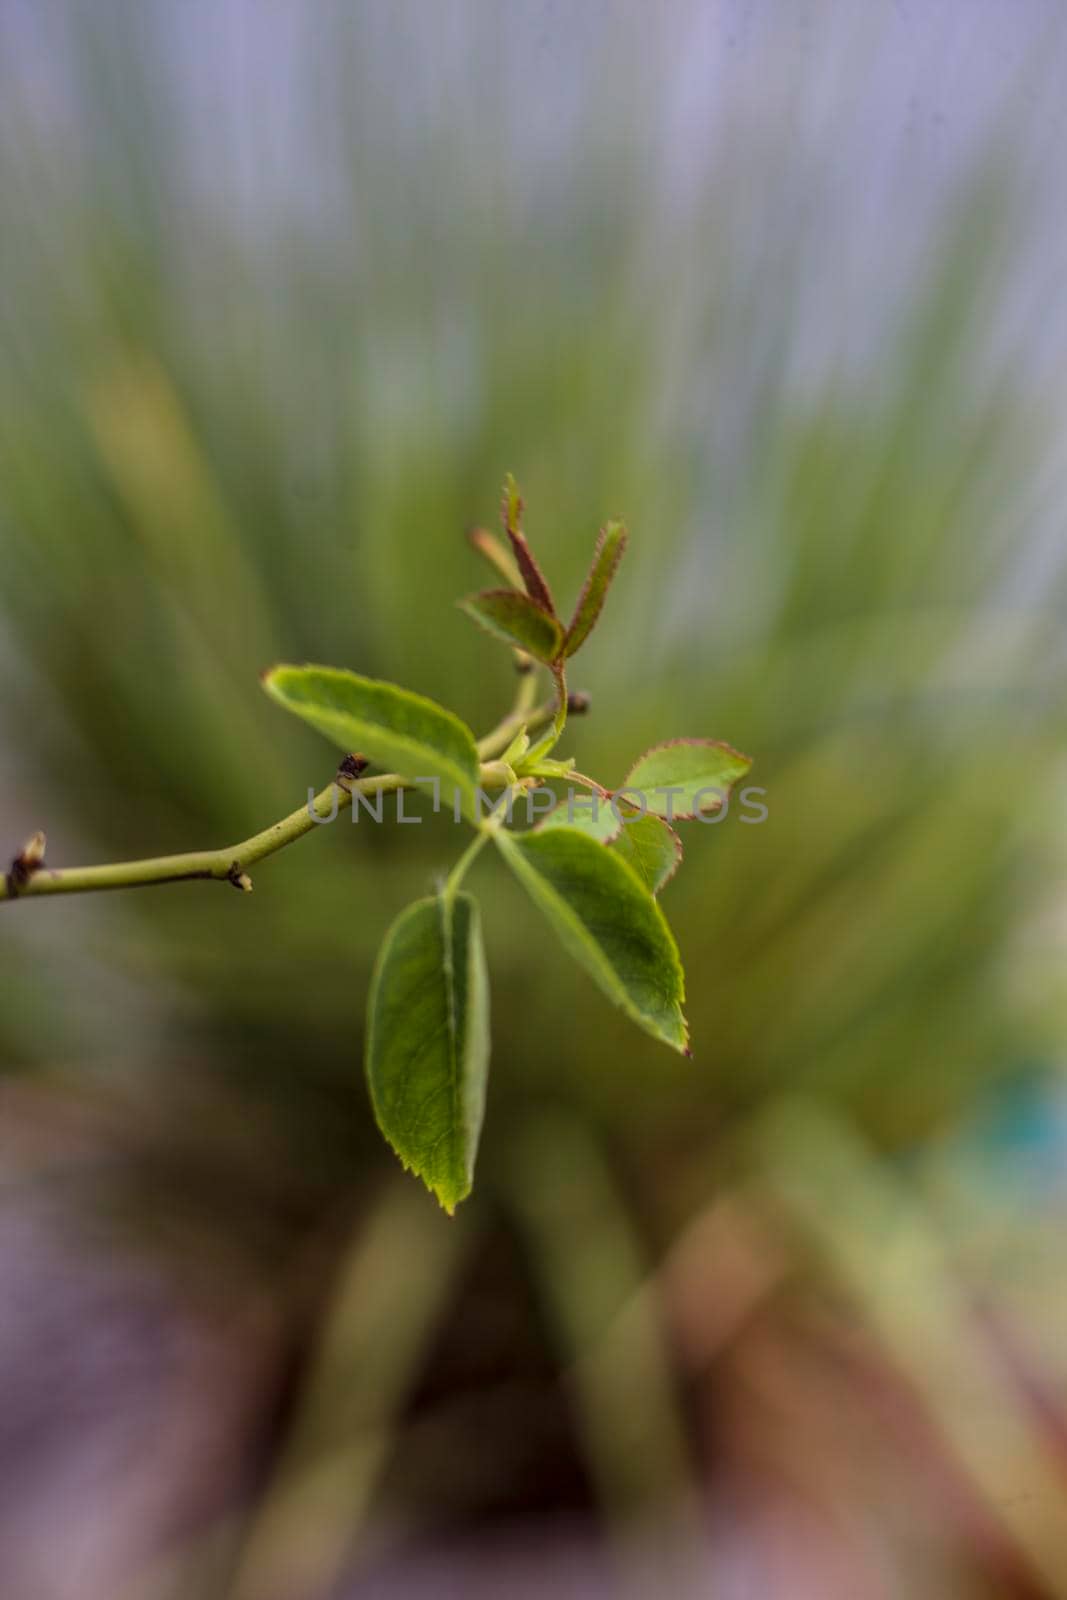 Close up shot of new leaf of rose flower or rosa flower along with the blurred background of the other green vegetation.